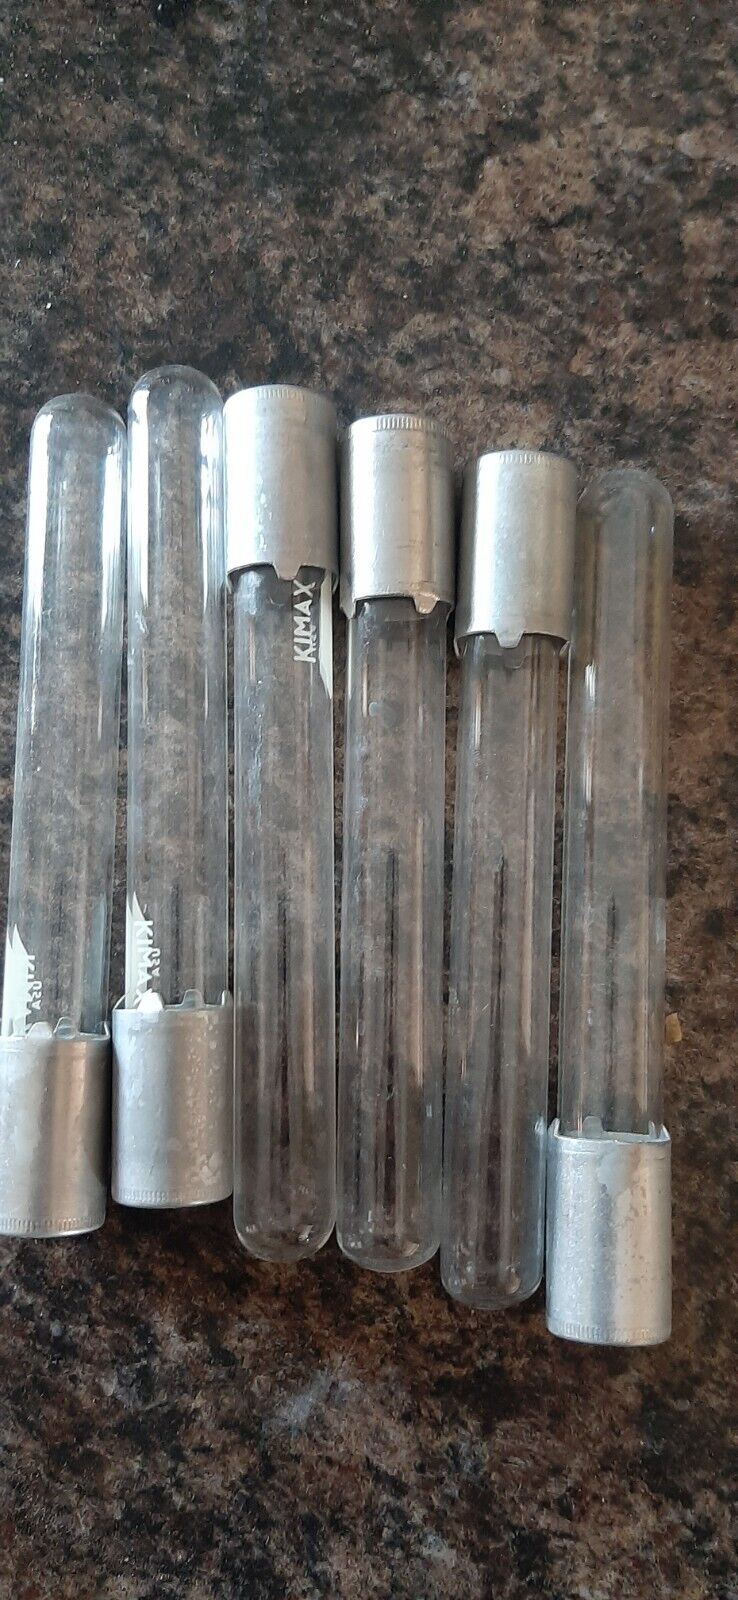 Vintage Kimax 6 inch Test Tube lot of 6 with caps